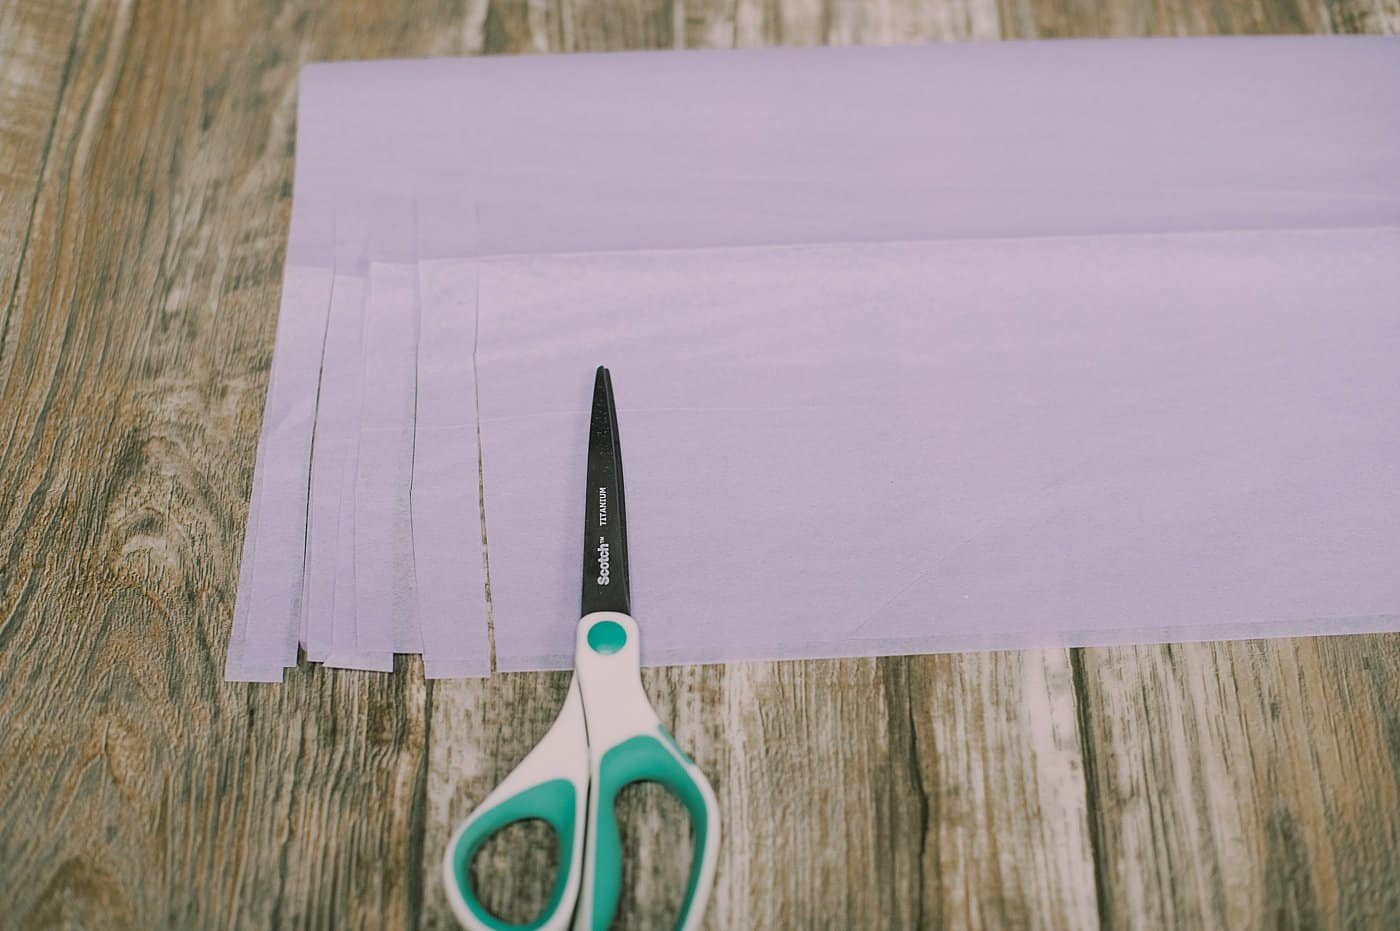 Make slits up from the bottom of the tissue paper, about ½" - ¾" wide.